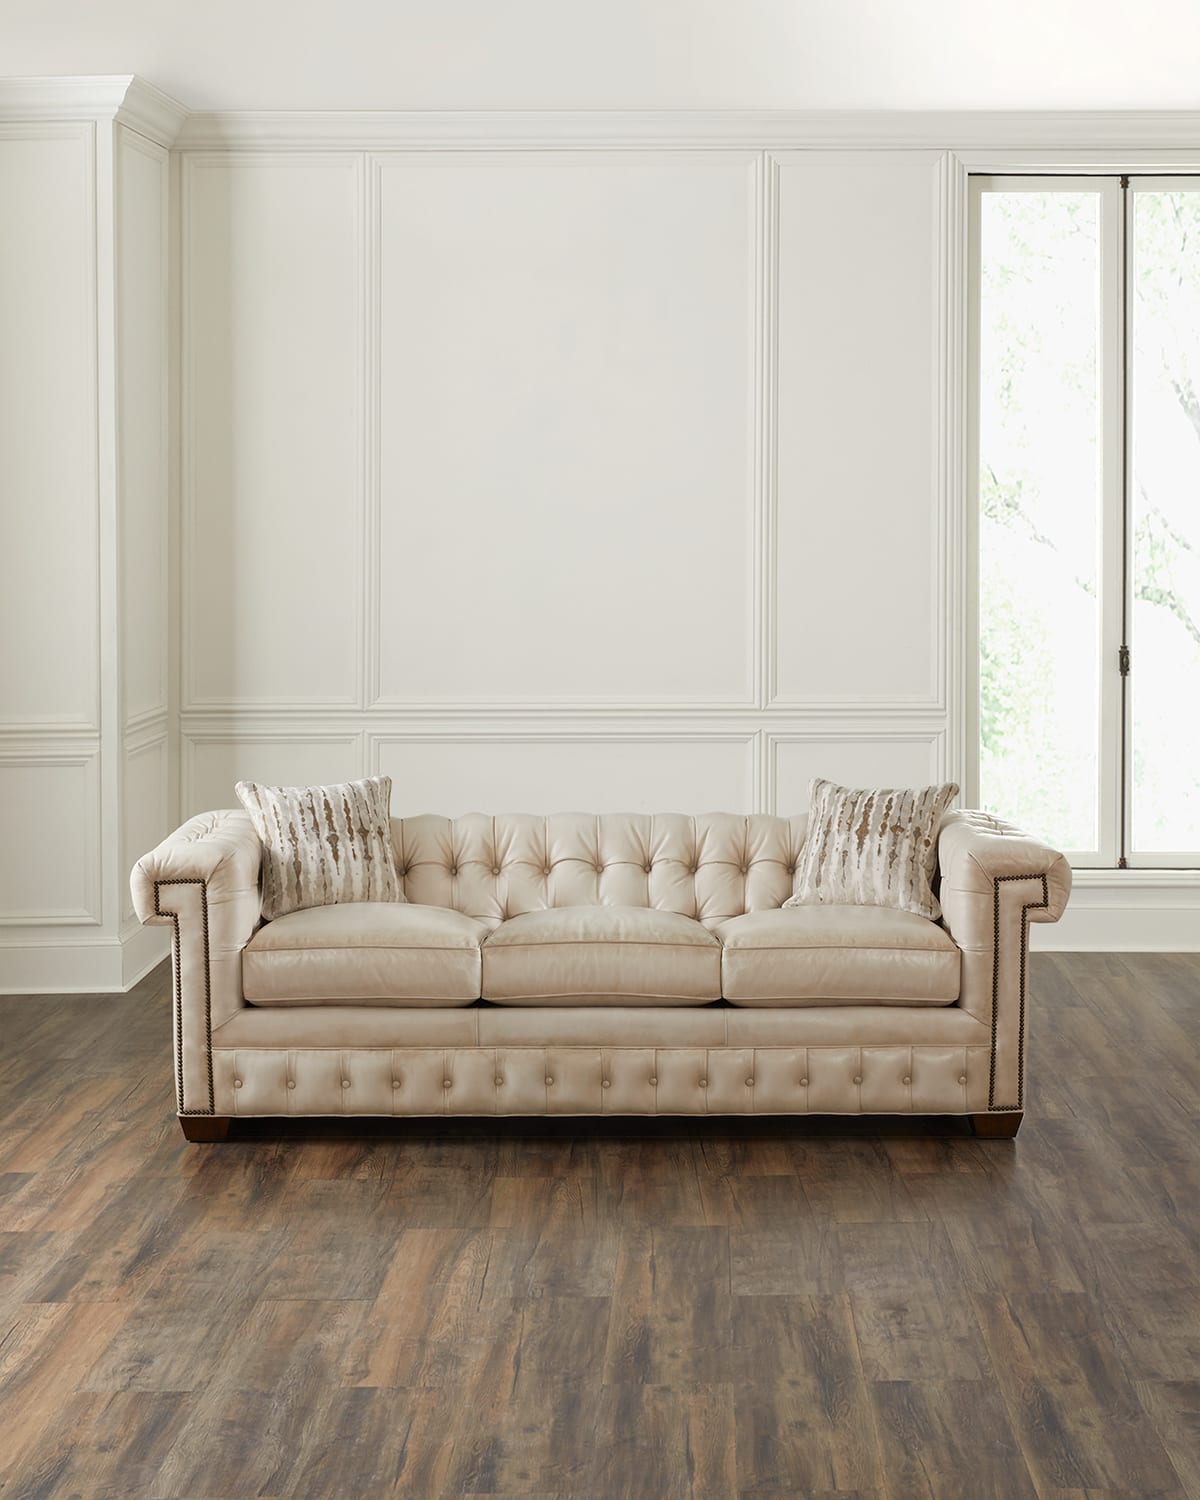 Old Hickory Tannery Valko Leather Chesterfield Sofa, 97.5"